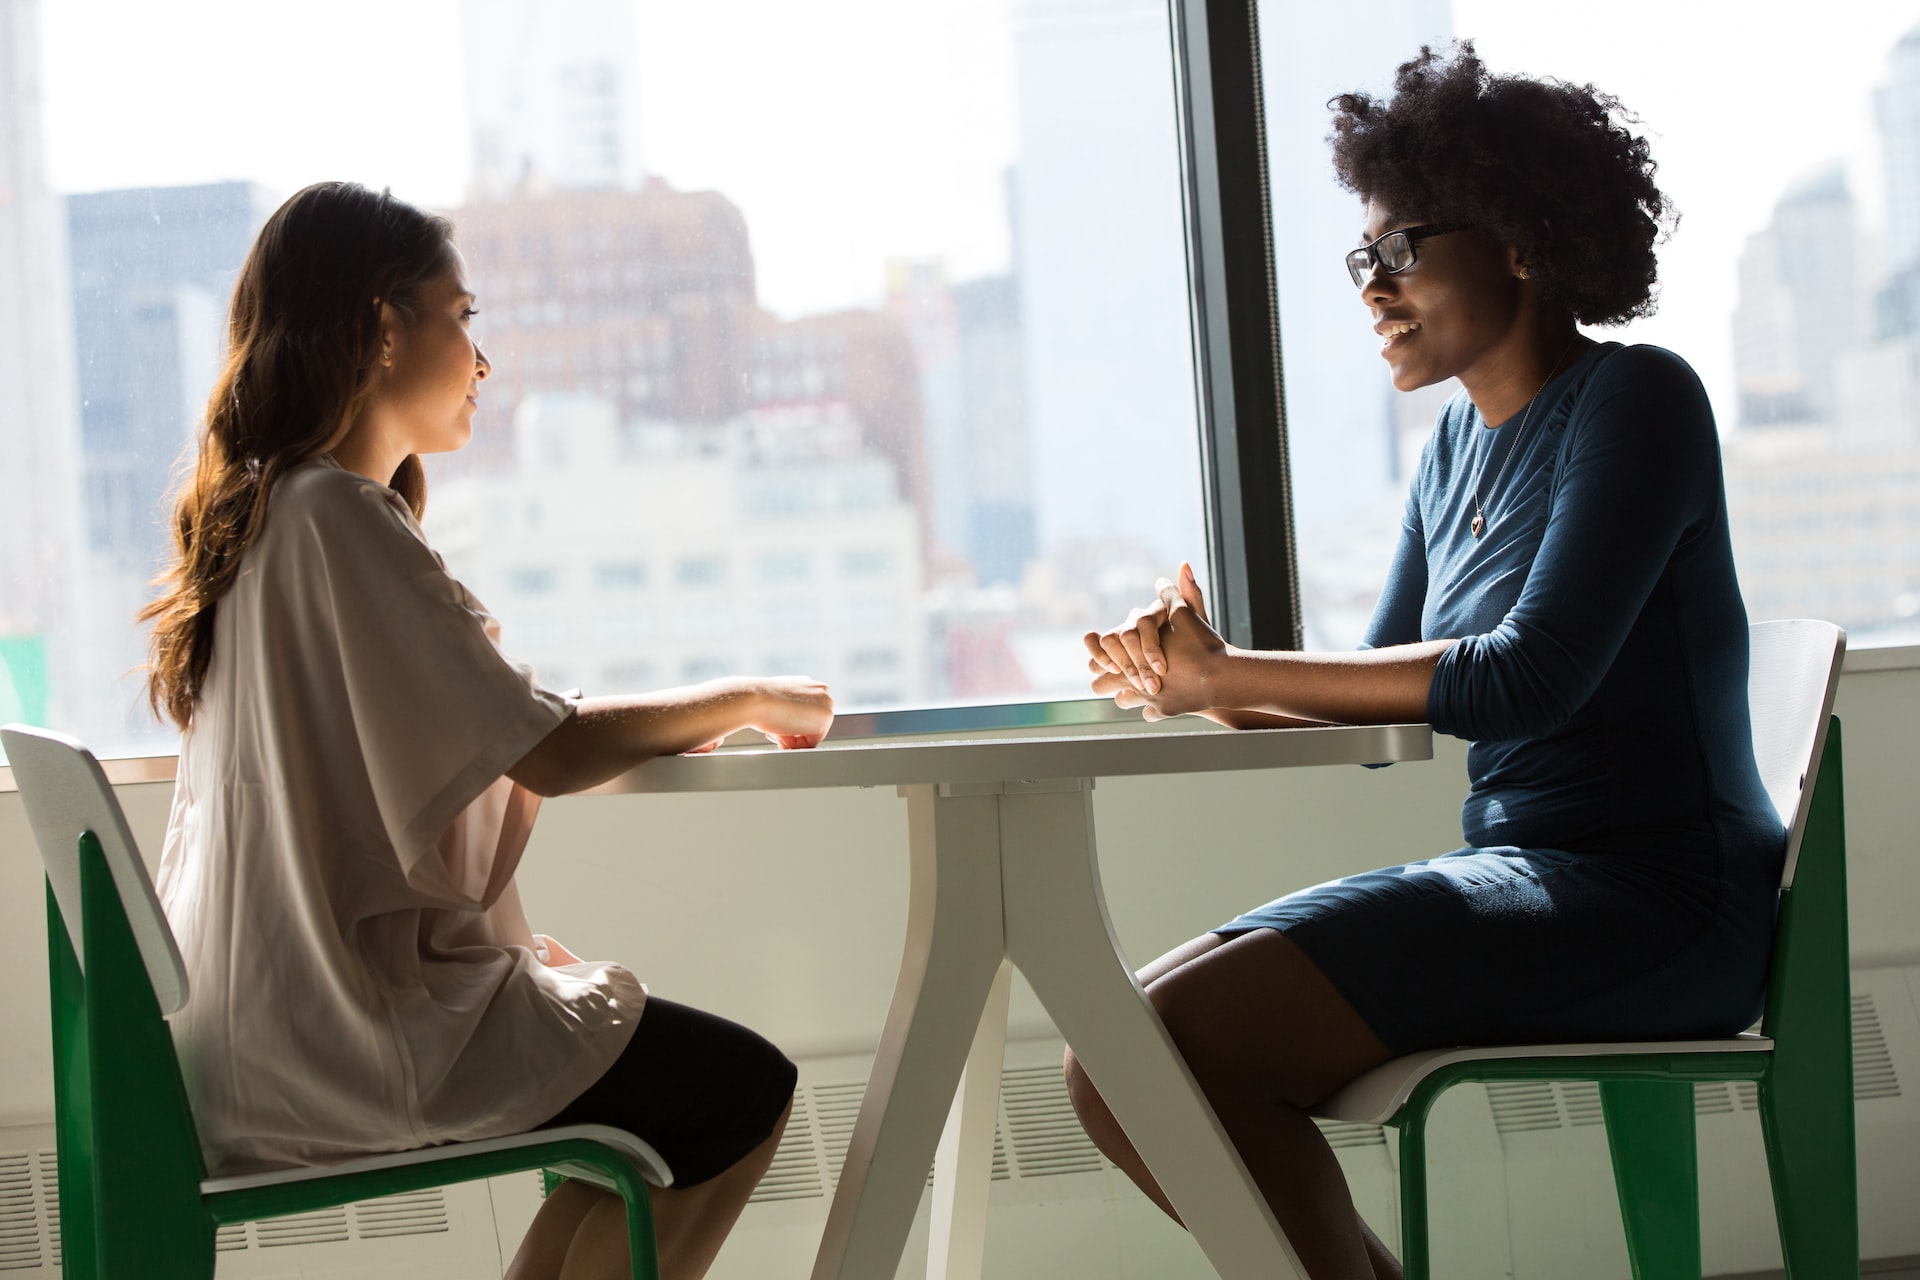 Consultation between young Black female in blue sweater and young woman in short-sleeved white shirt together at silver table with a skyline view in the background.